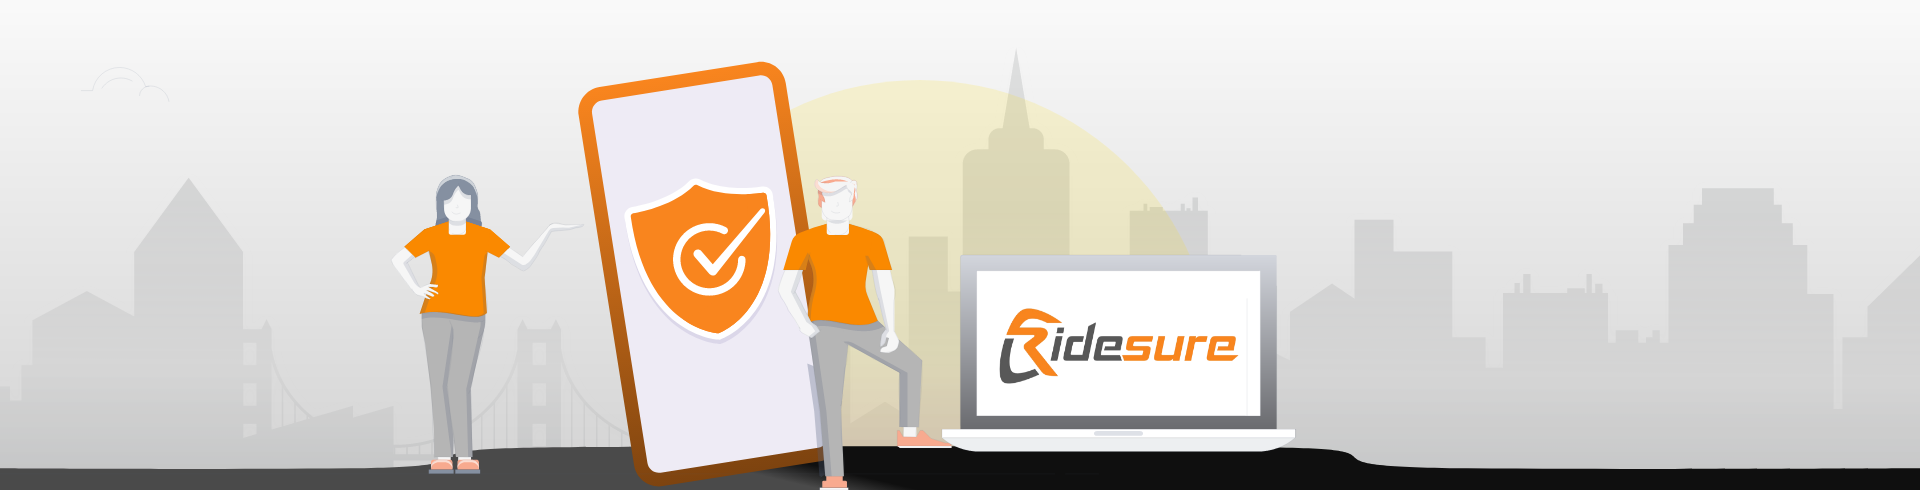 RIDESURE-It may take time to get your car repaired